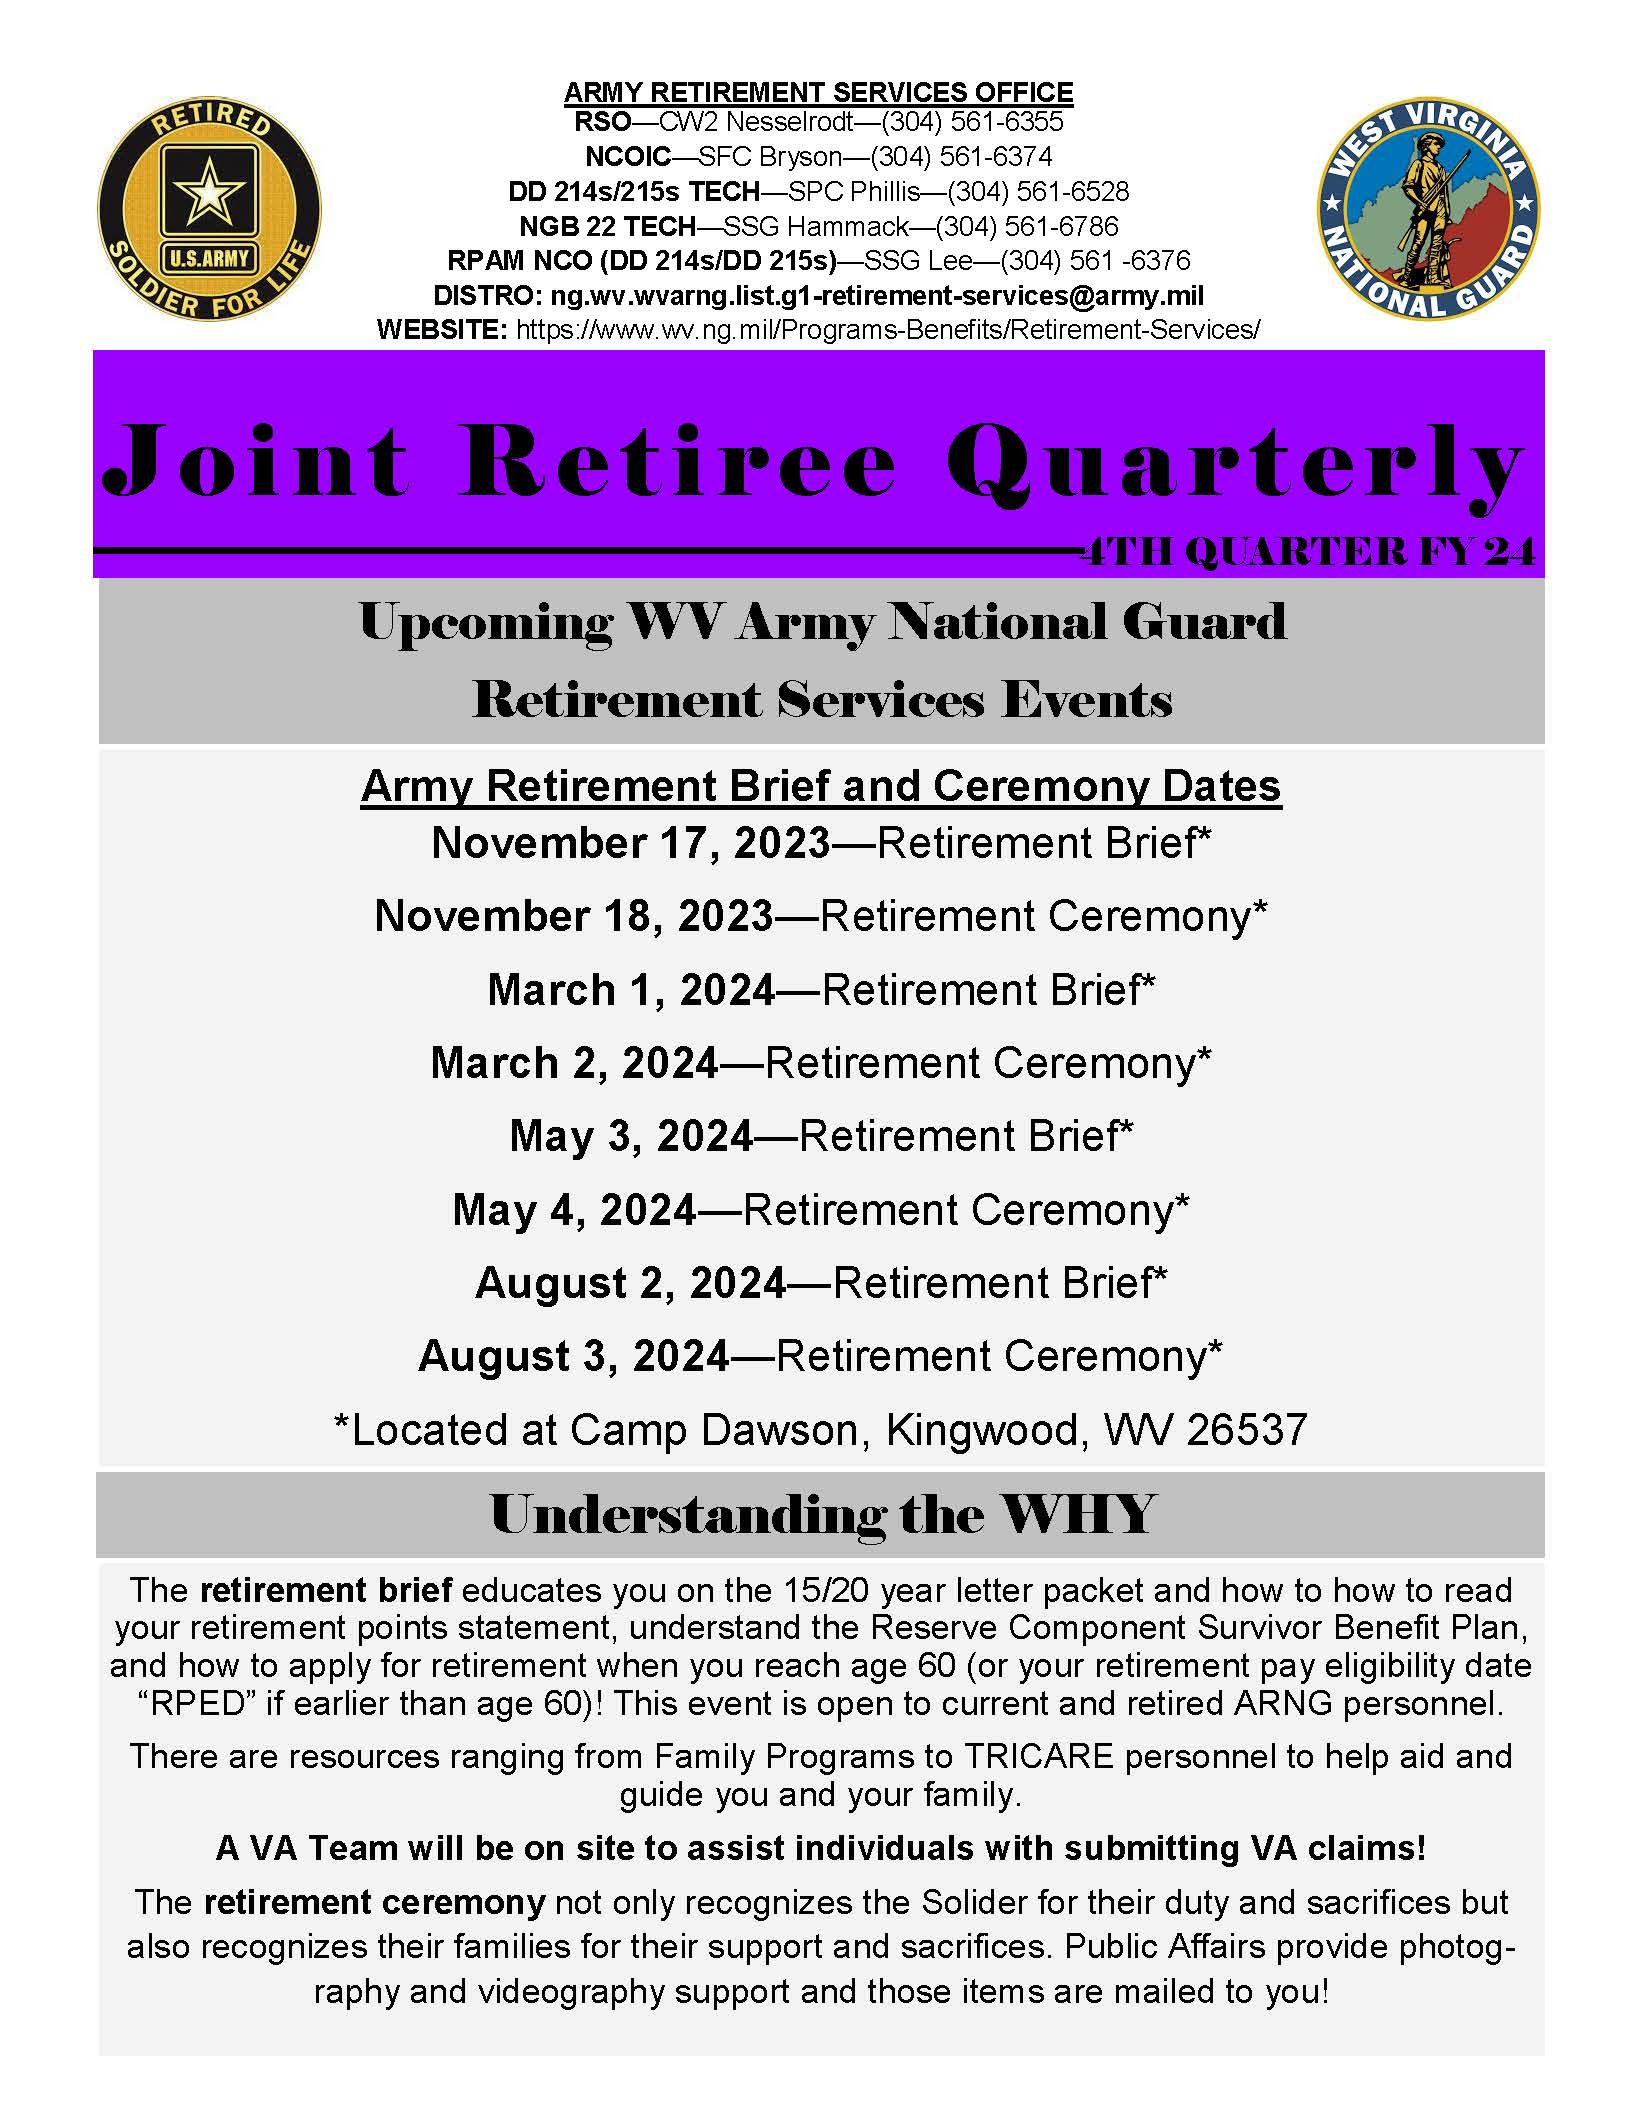 Q1 FY24 Joint Retiree Quarterly Newsletter - ALT Test available when download linked PDF 